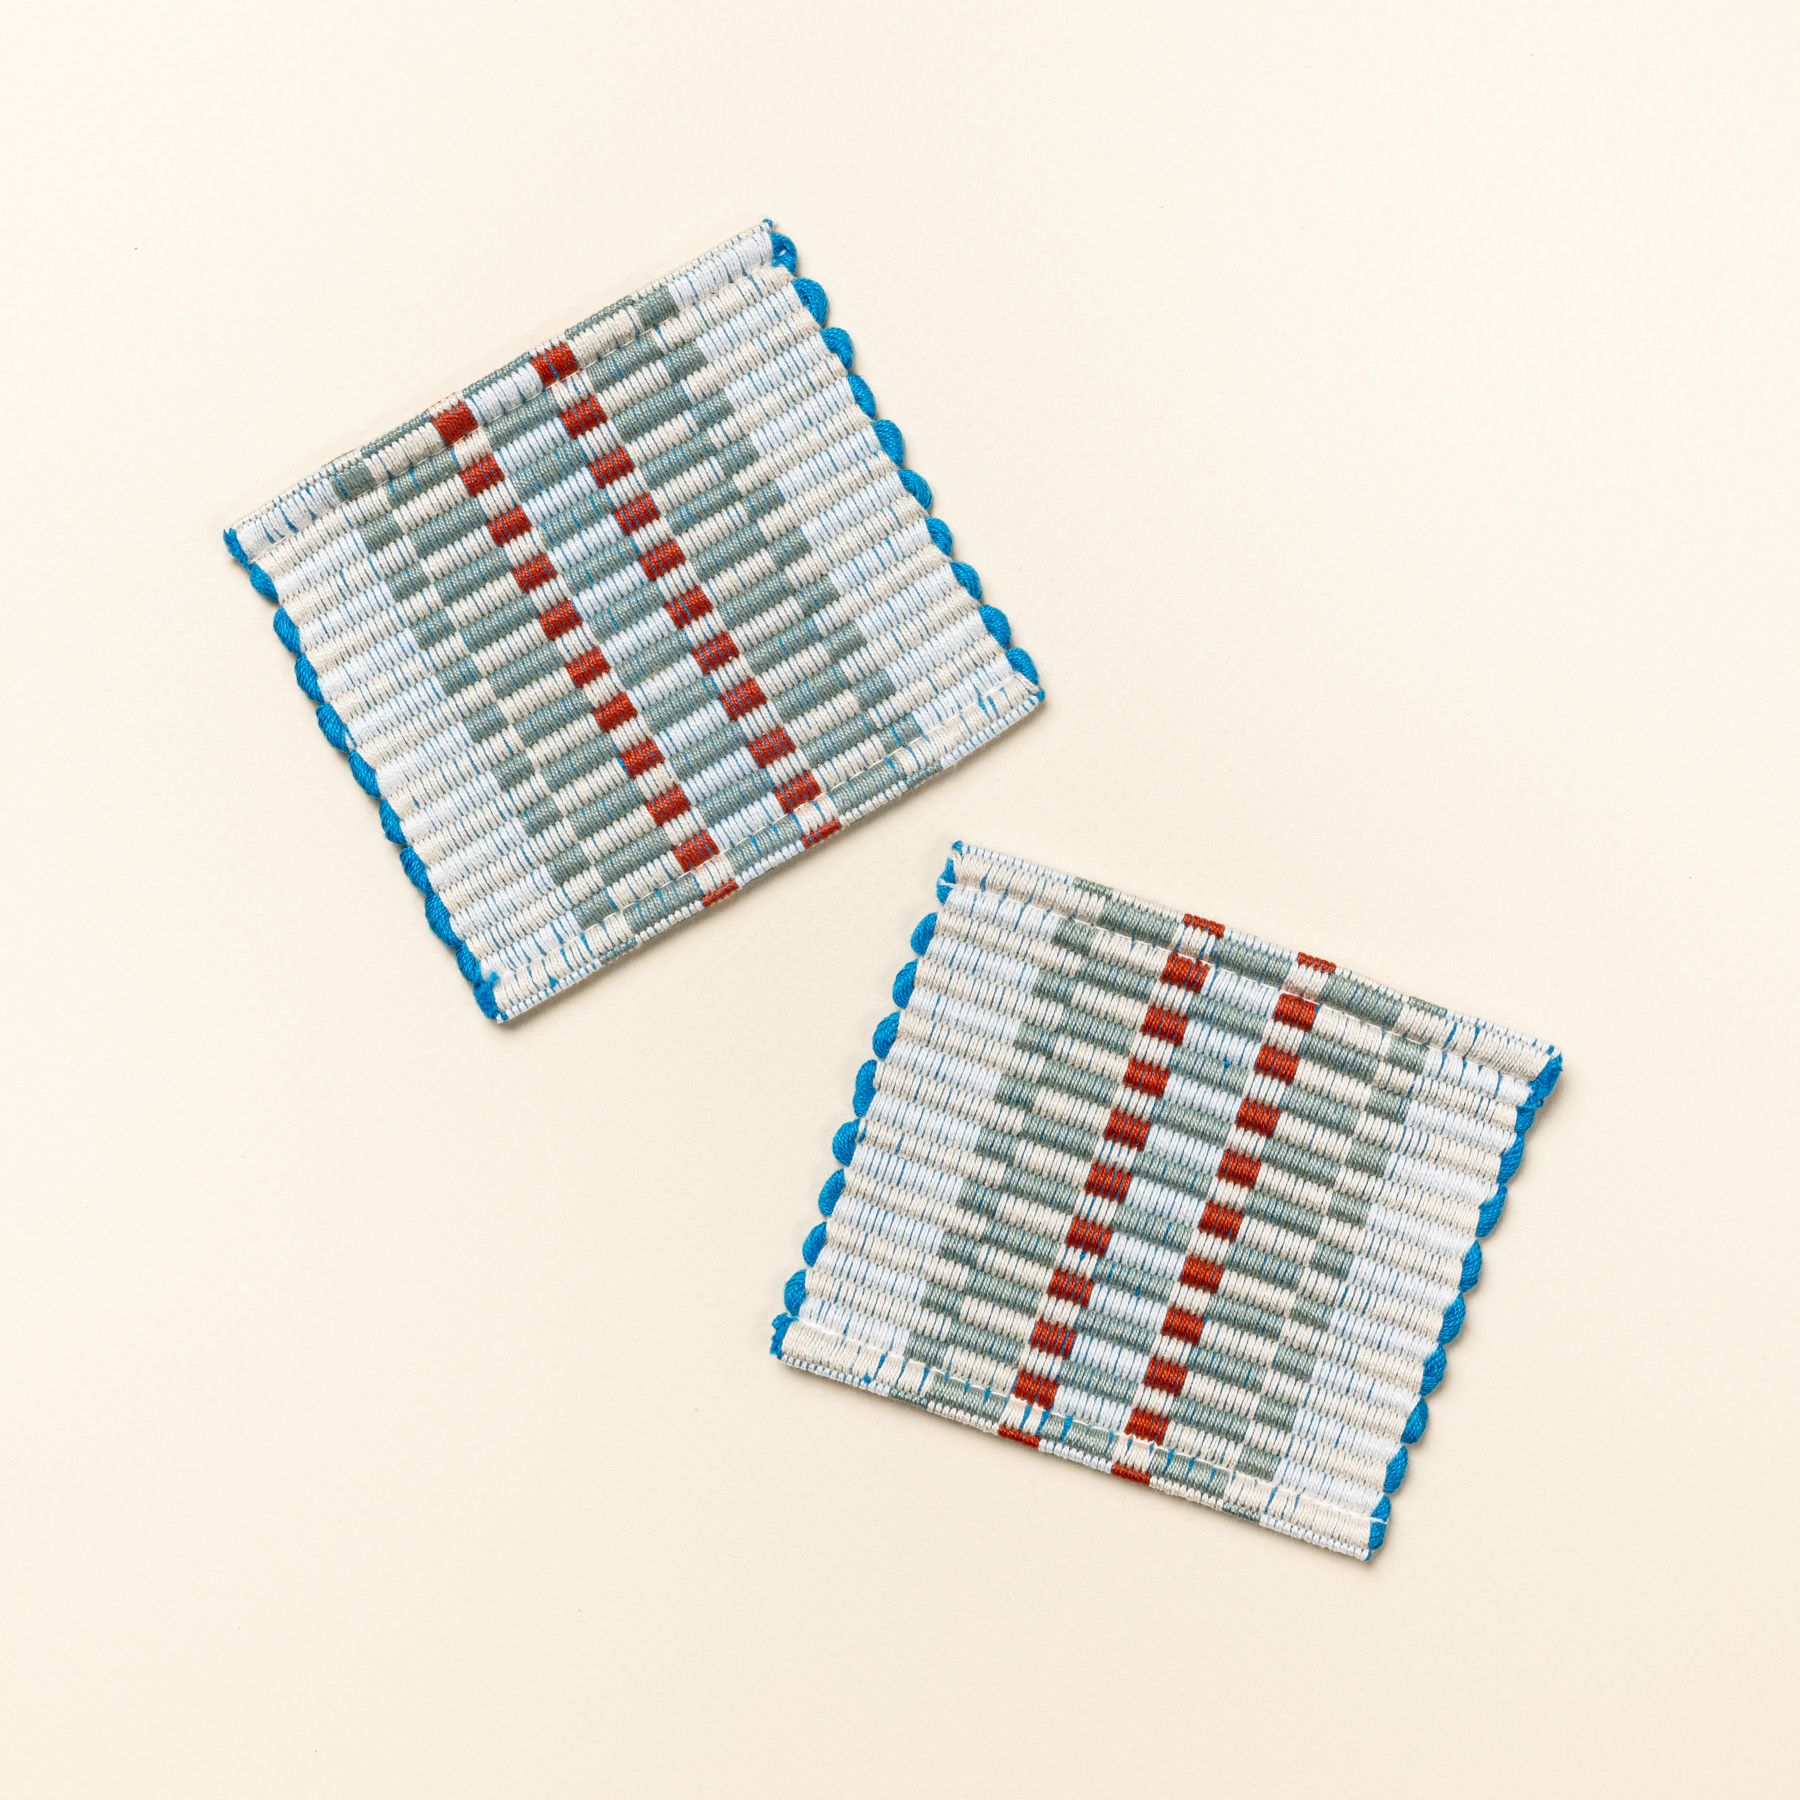 Two square coasters that are hand woven in a striped rectangular grid design in sage, orange, and blue colors